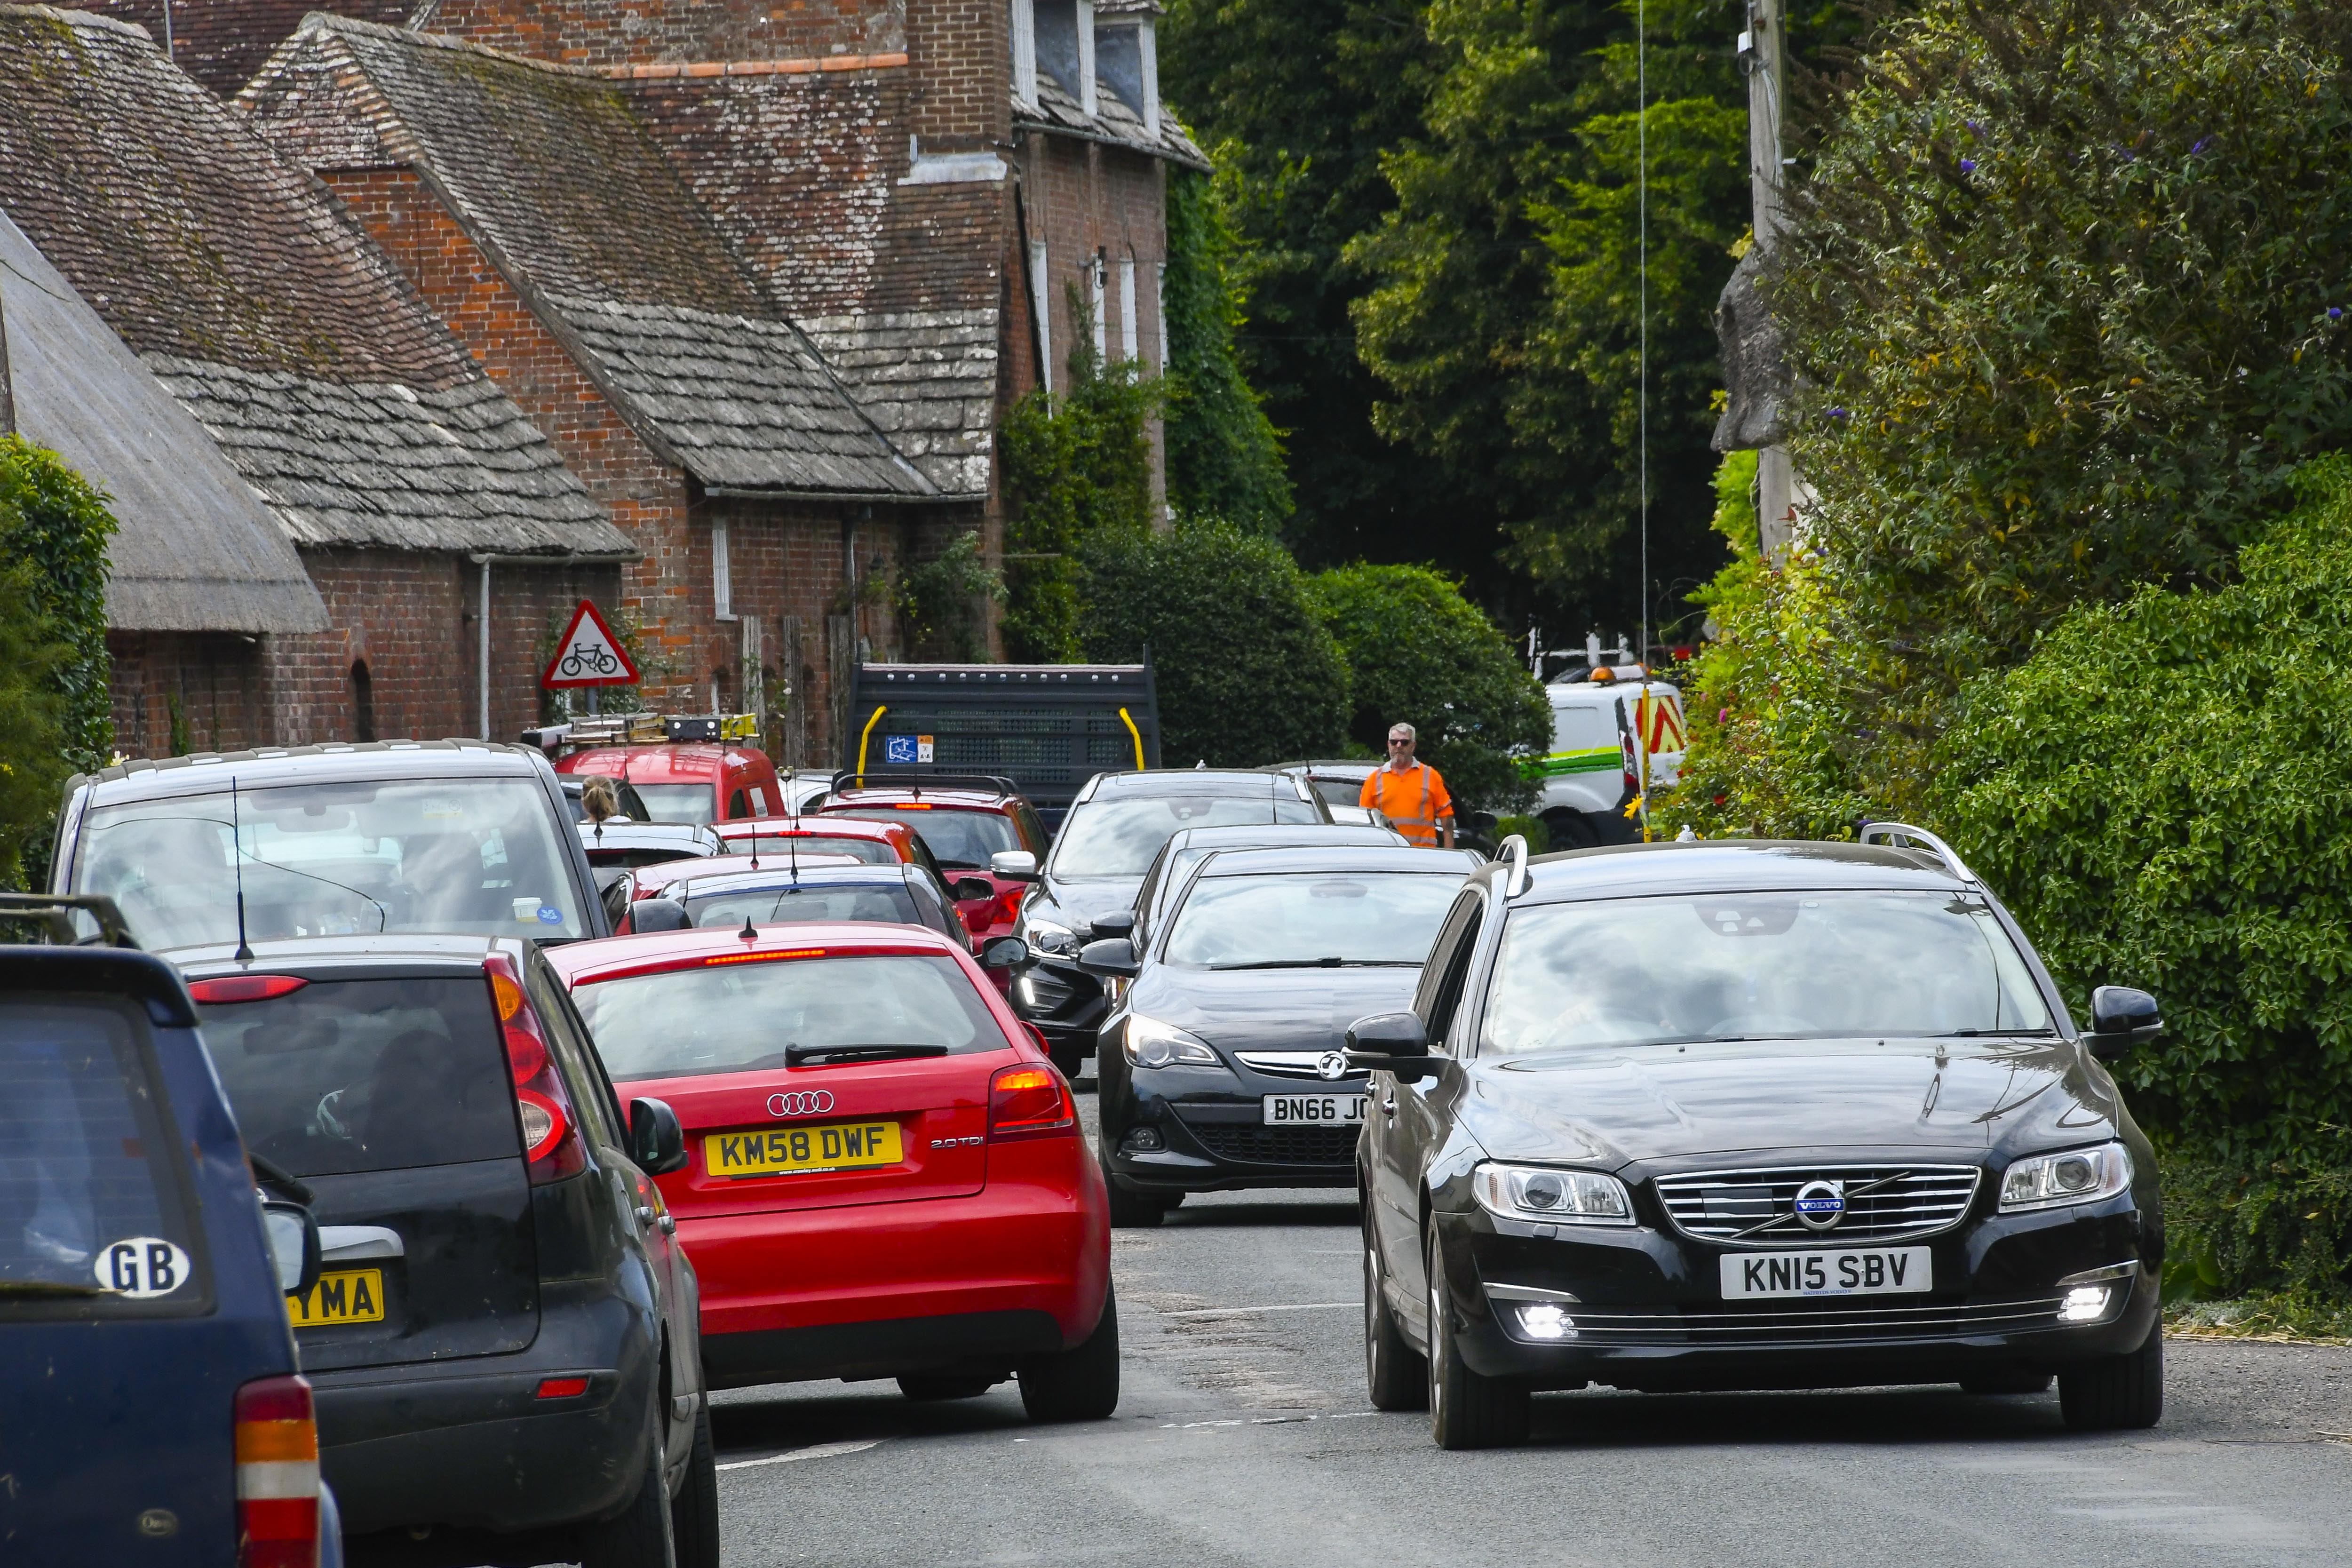 Traffic chaos in the village of Newborough